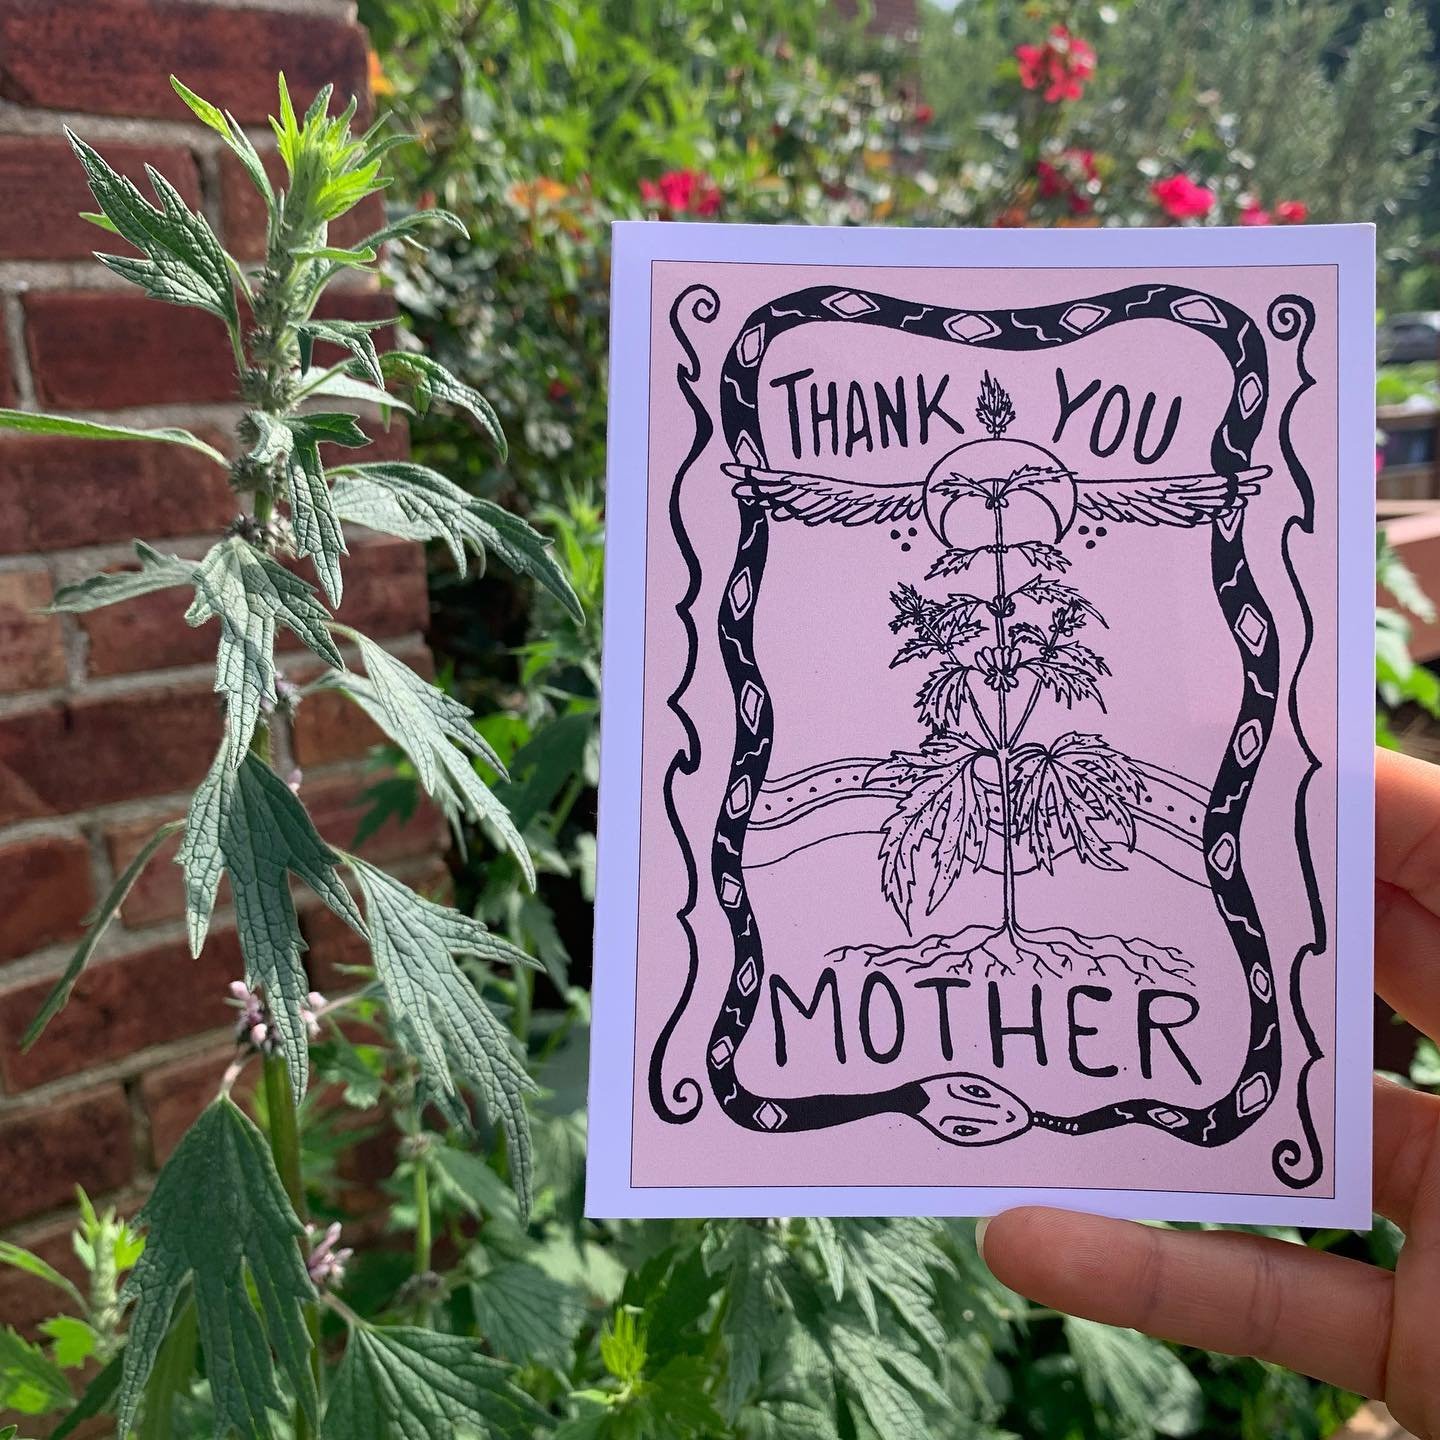 Thanks to all the human and plant Mama&rsquo;s! 🩷🫛🌺🌿
Place your order before tomorrow eve to get your cards before Mothers Day this weekend.

Choose between:
🫛Sugar Snap Mama
&amp;
🌿Thank you Mother Motherwort

Message me to order$ *4  each
-
-